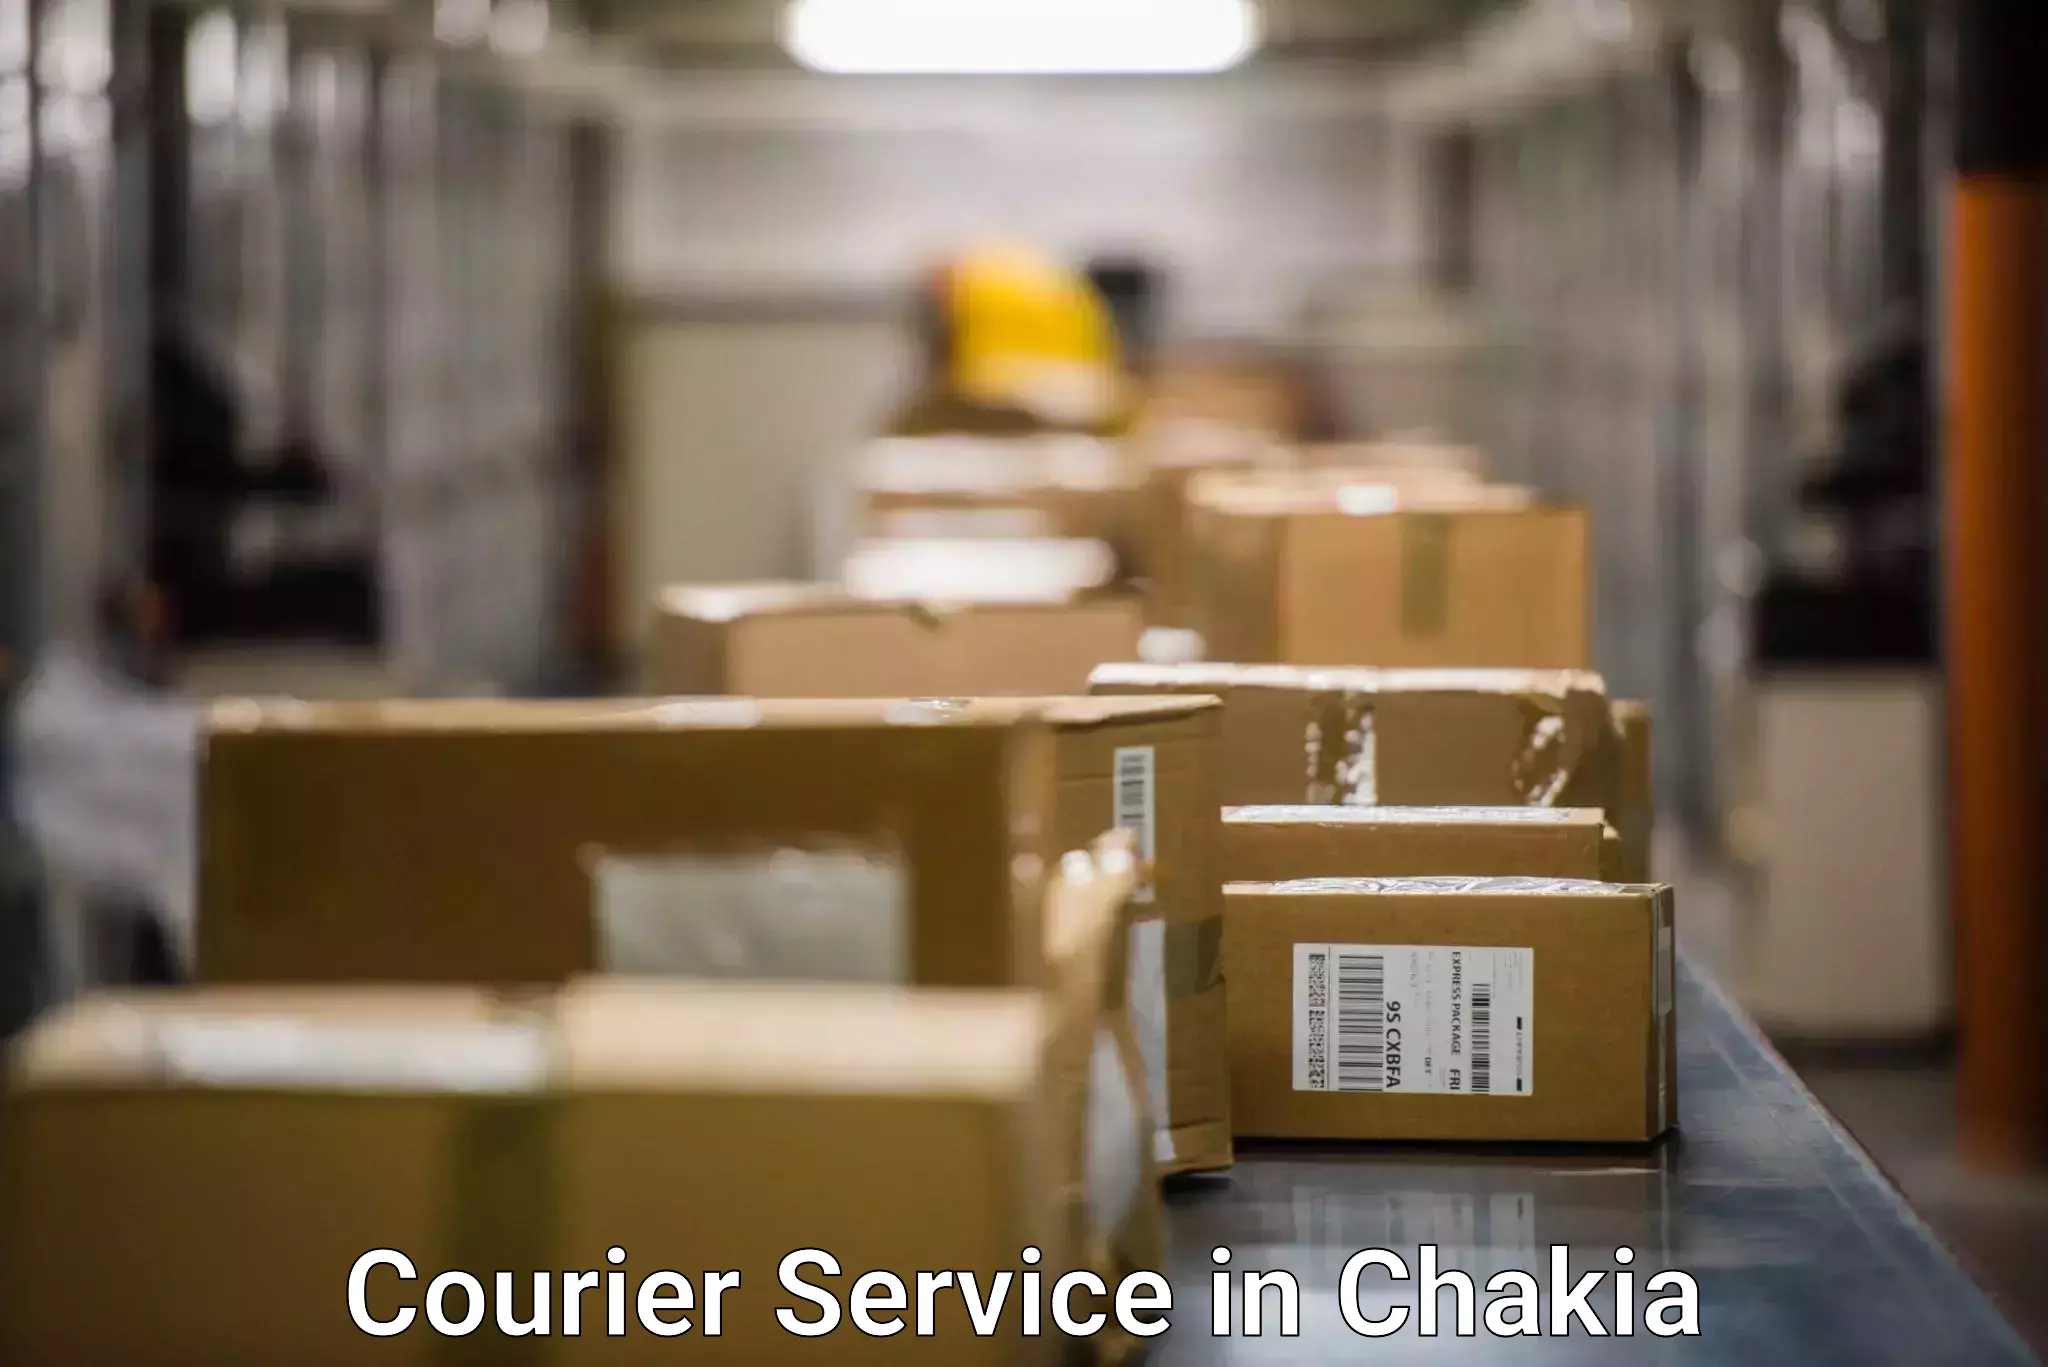 Secure packaging in Chakia